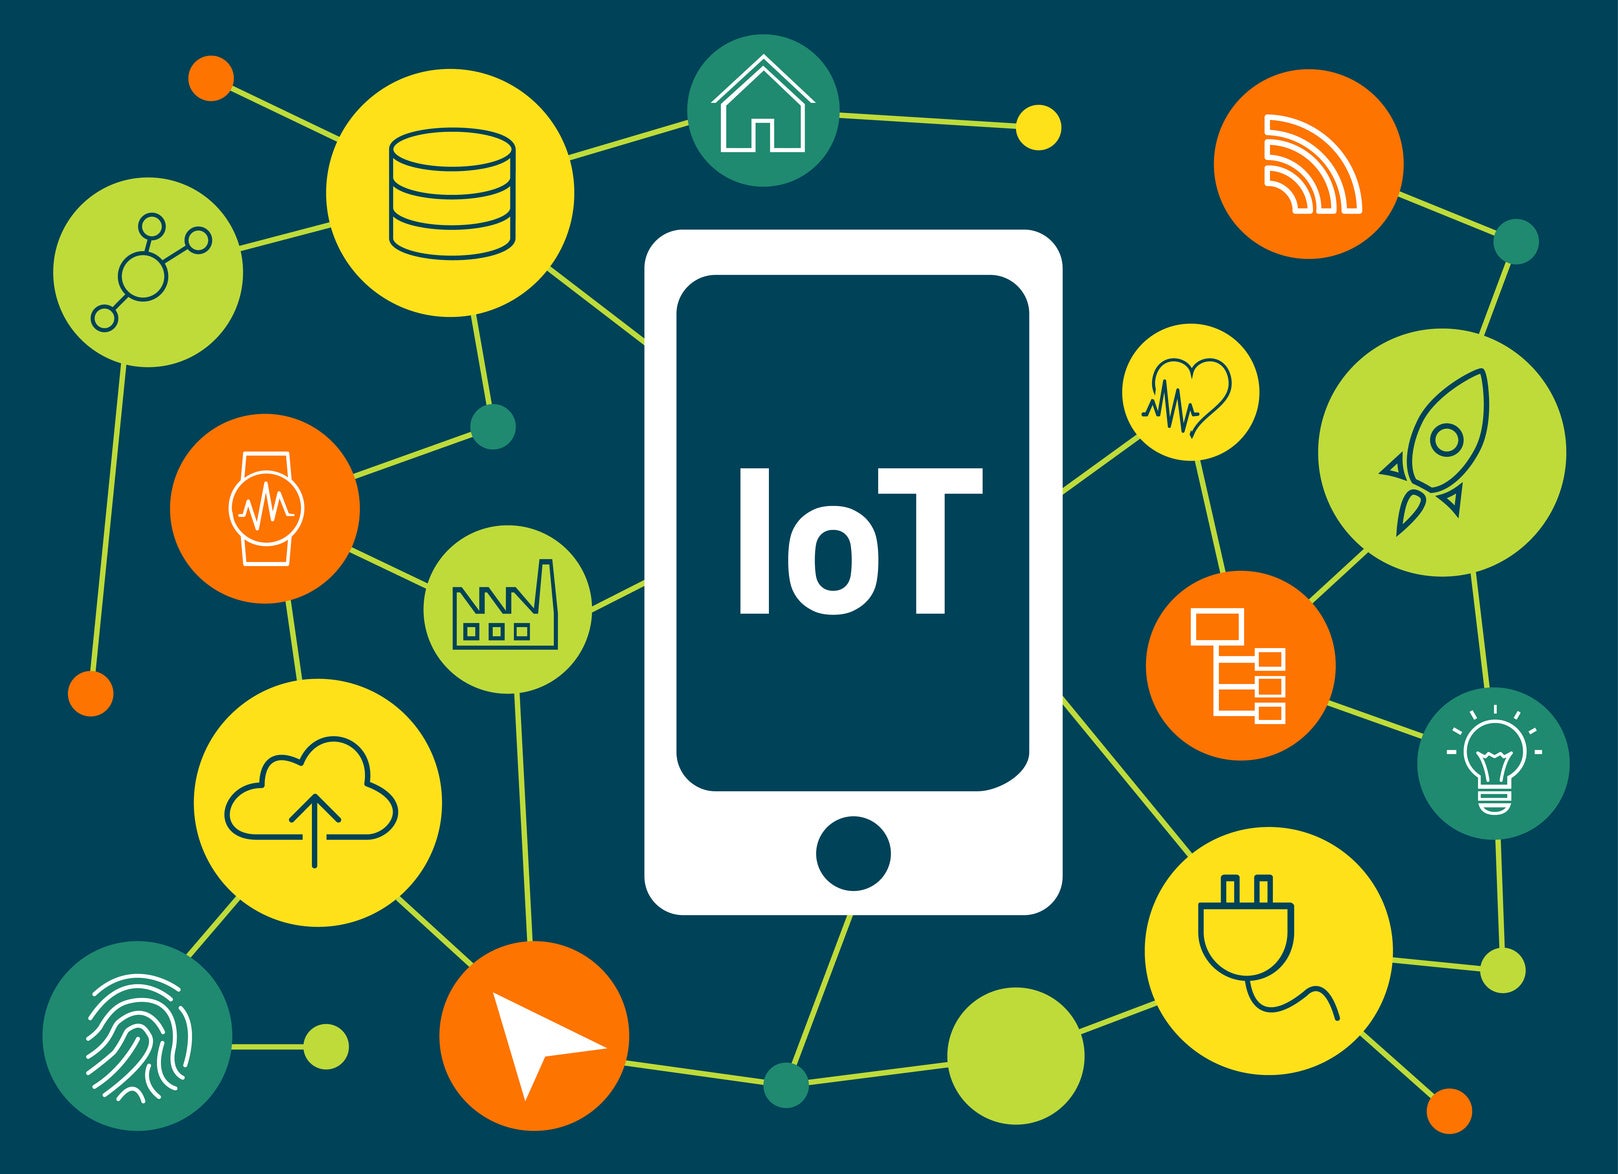 Tibco bolsters IoT analytics offering with Statistica acquisition